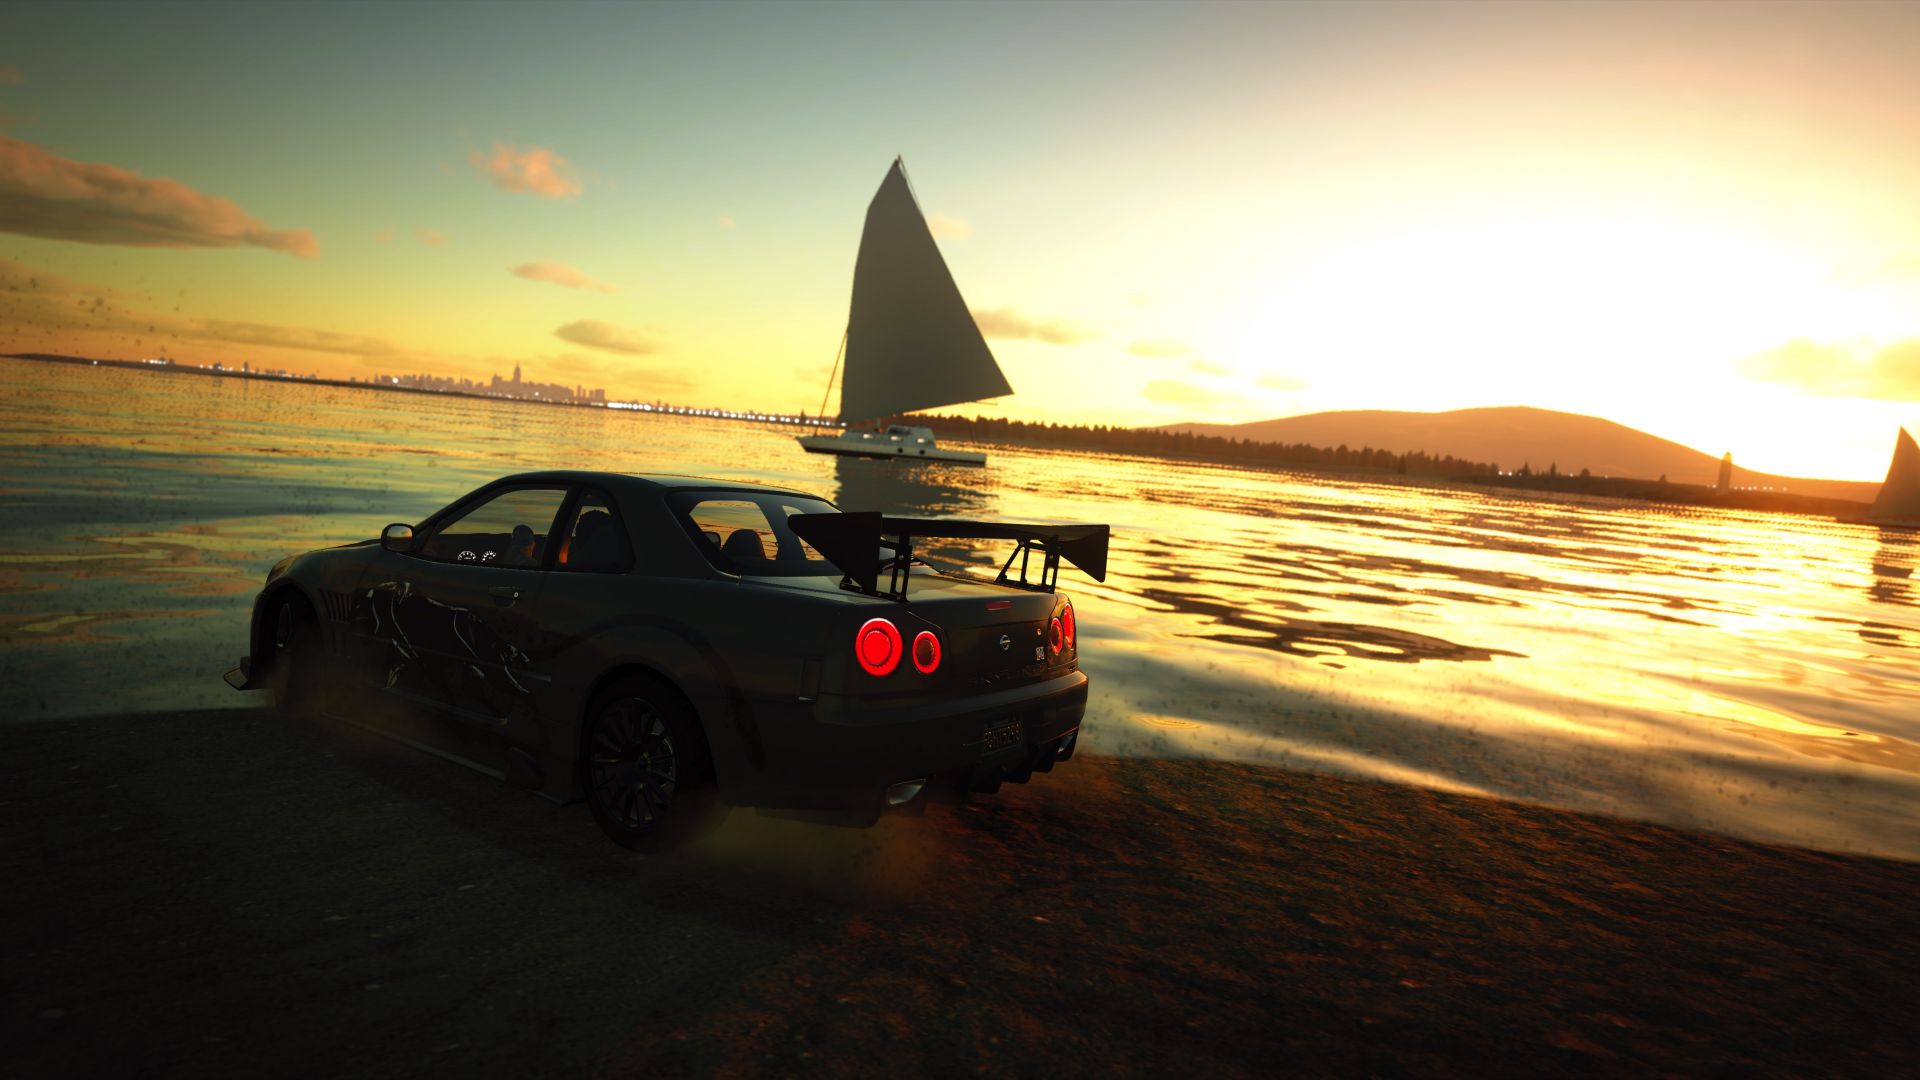 Wallpaper The Crew, Online game, car, ship, sunset